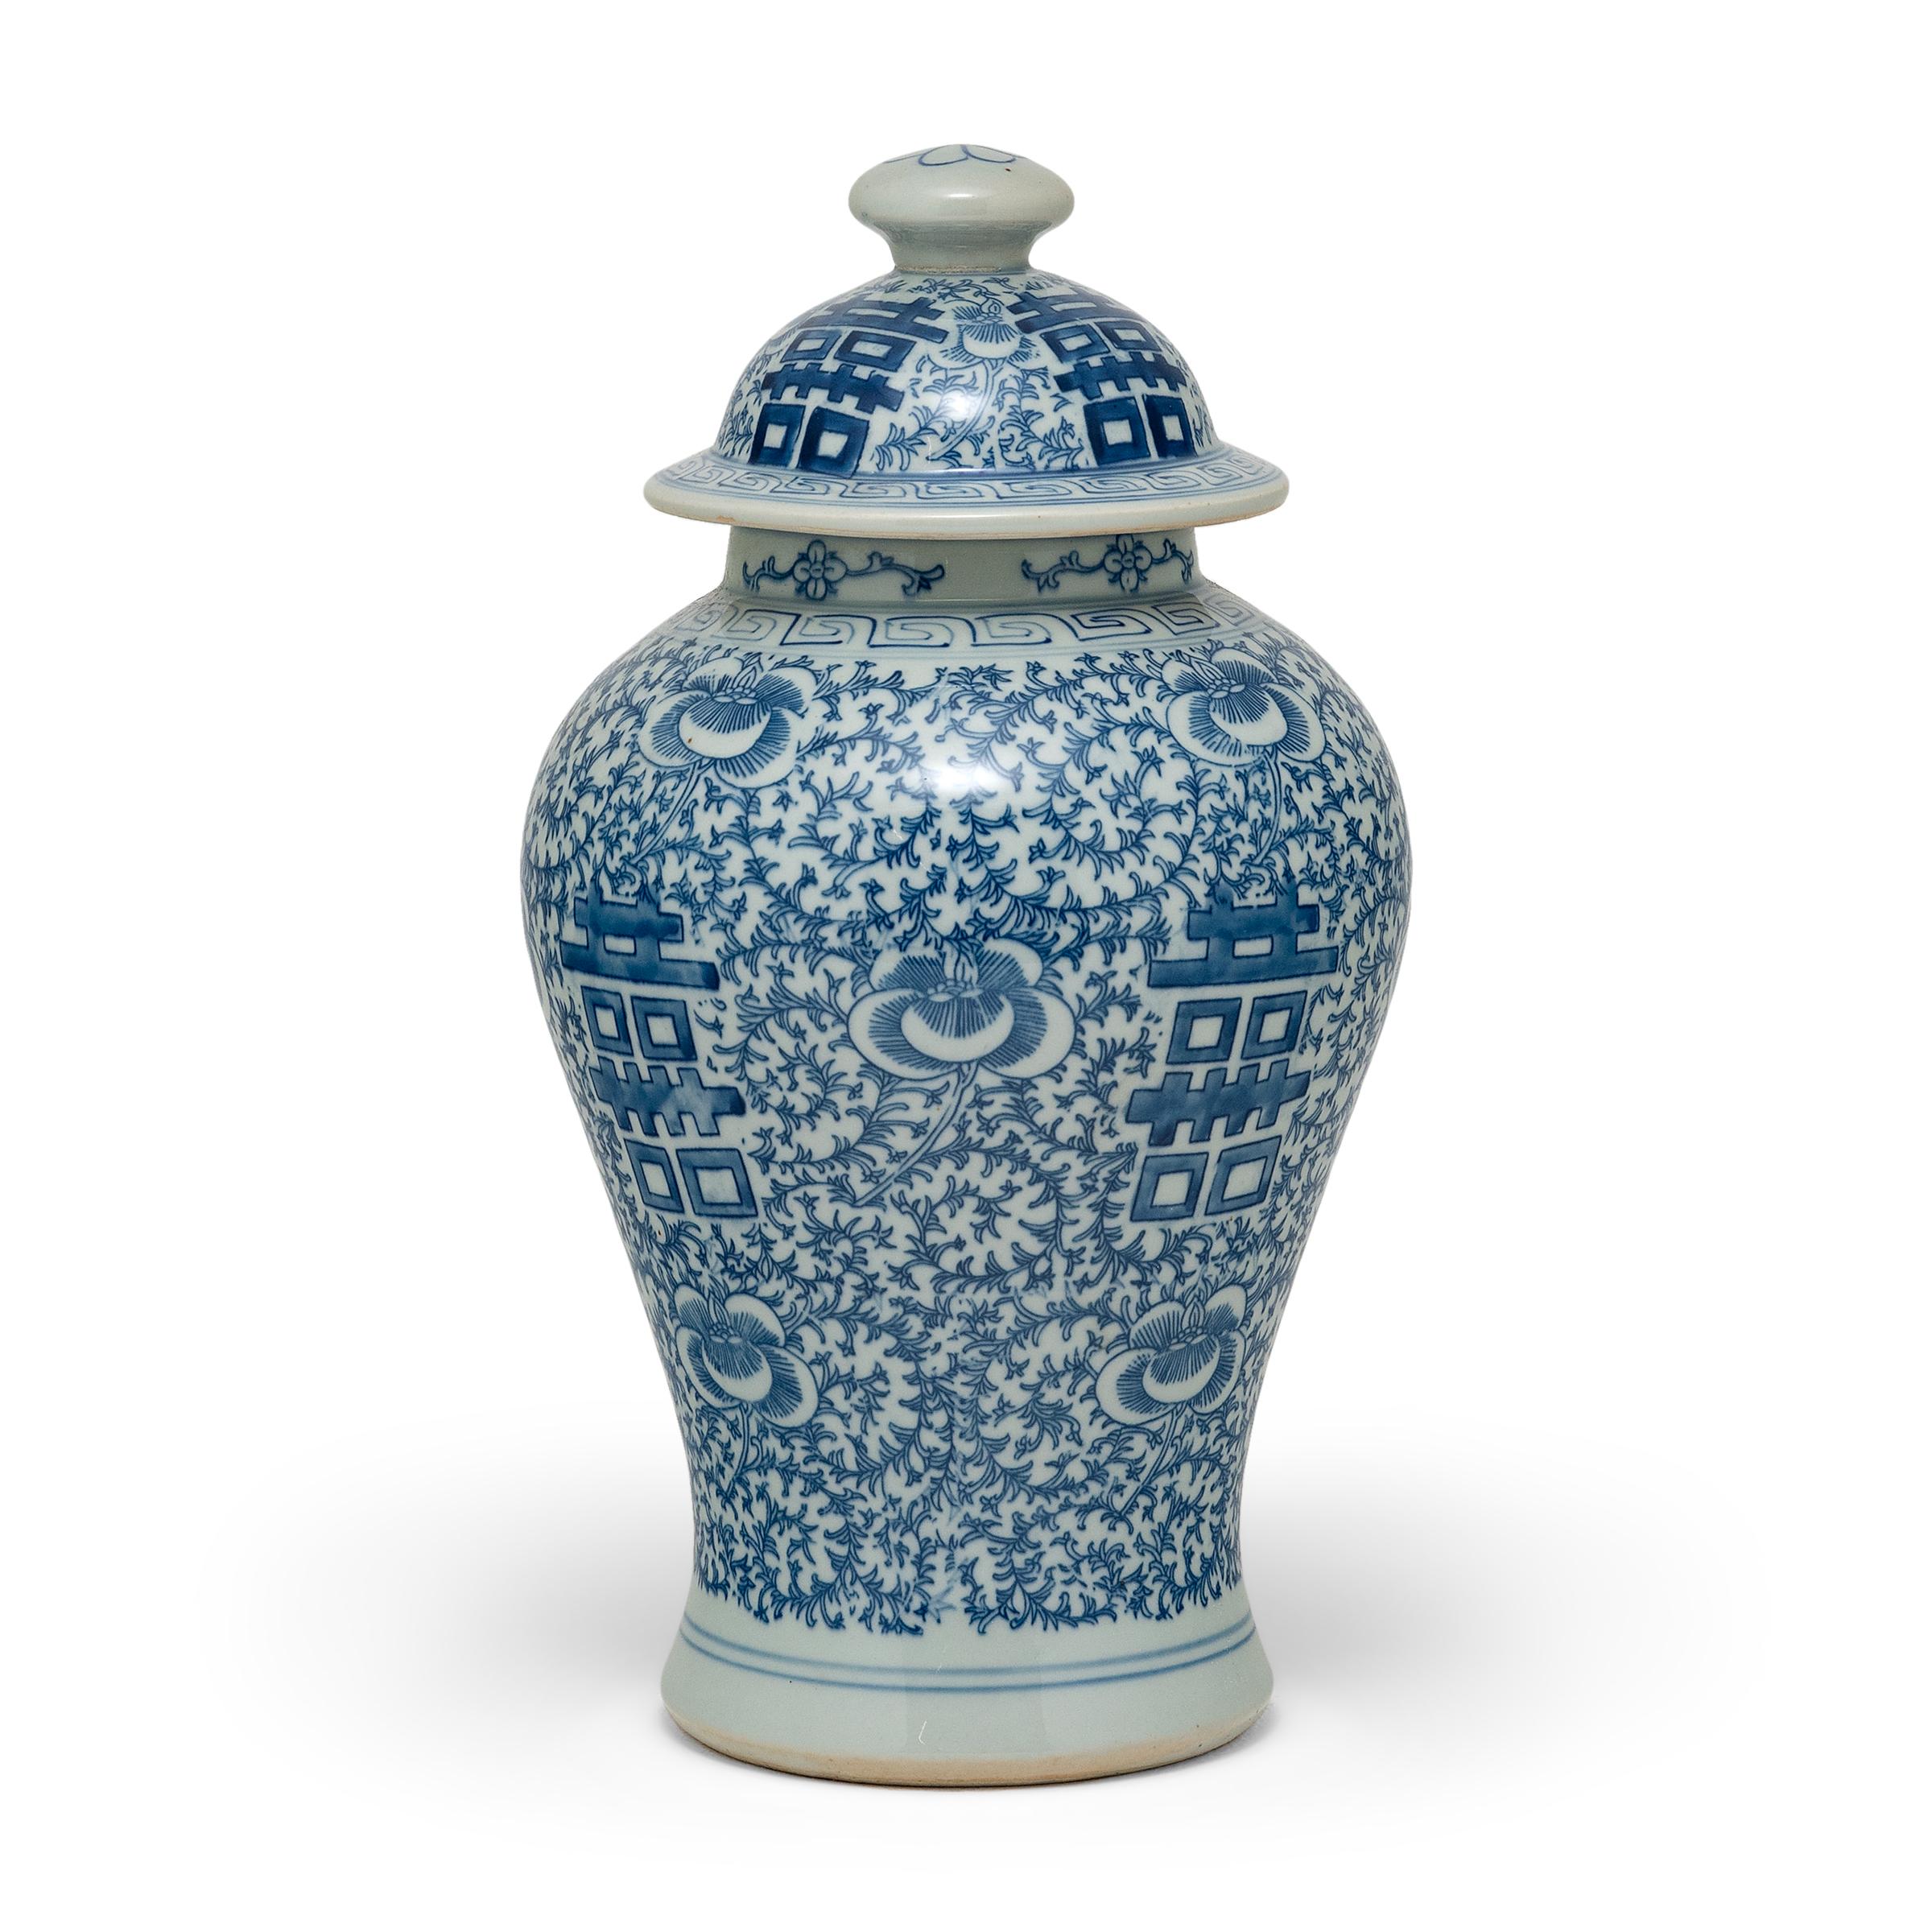 The symbol for double happiness adorns this slender ginger jar with best wishes for love, companionship and marital bliss. Glazed in the classic blue and white manner, the porcelain ginger jar has a classic form with rounded shoulders that taper to